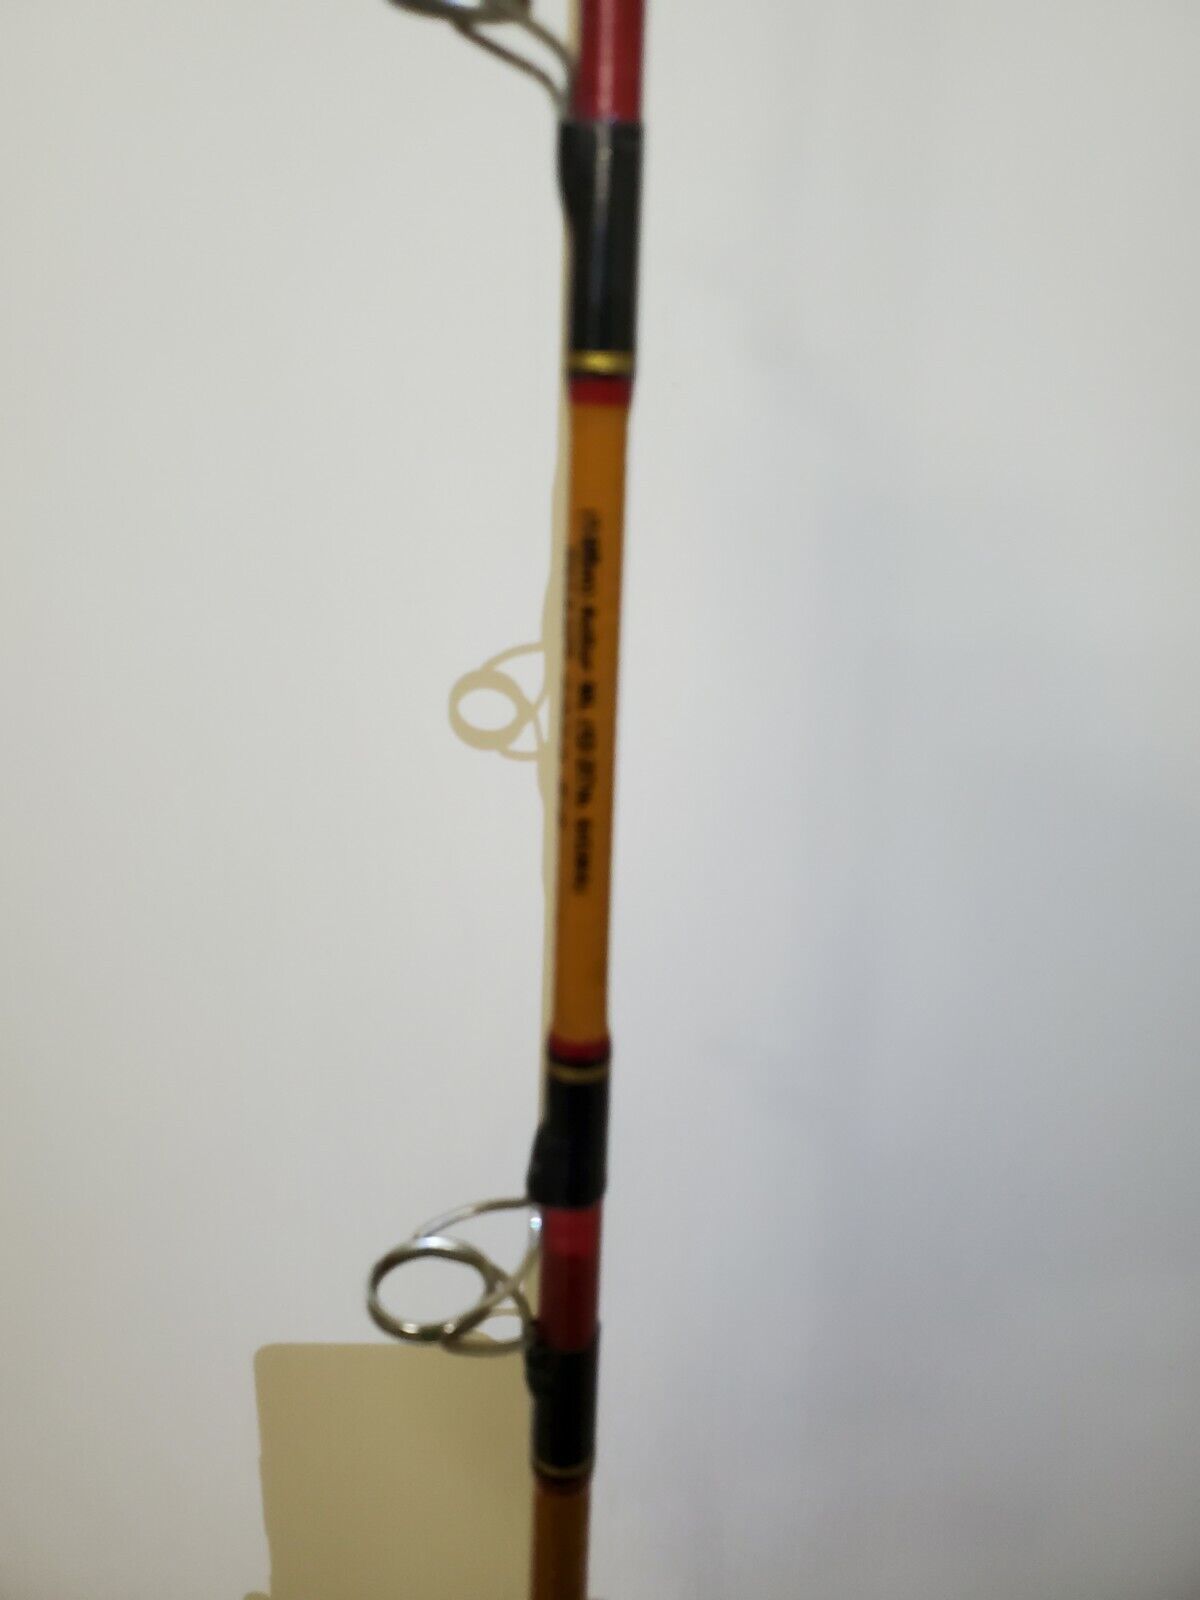 Used Shakespeare Ugly Stik Next Camouflage Micropoint 6'6 2 Piece Fishing  Pole – cssportinggoods